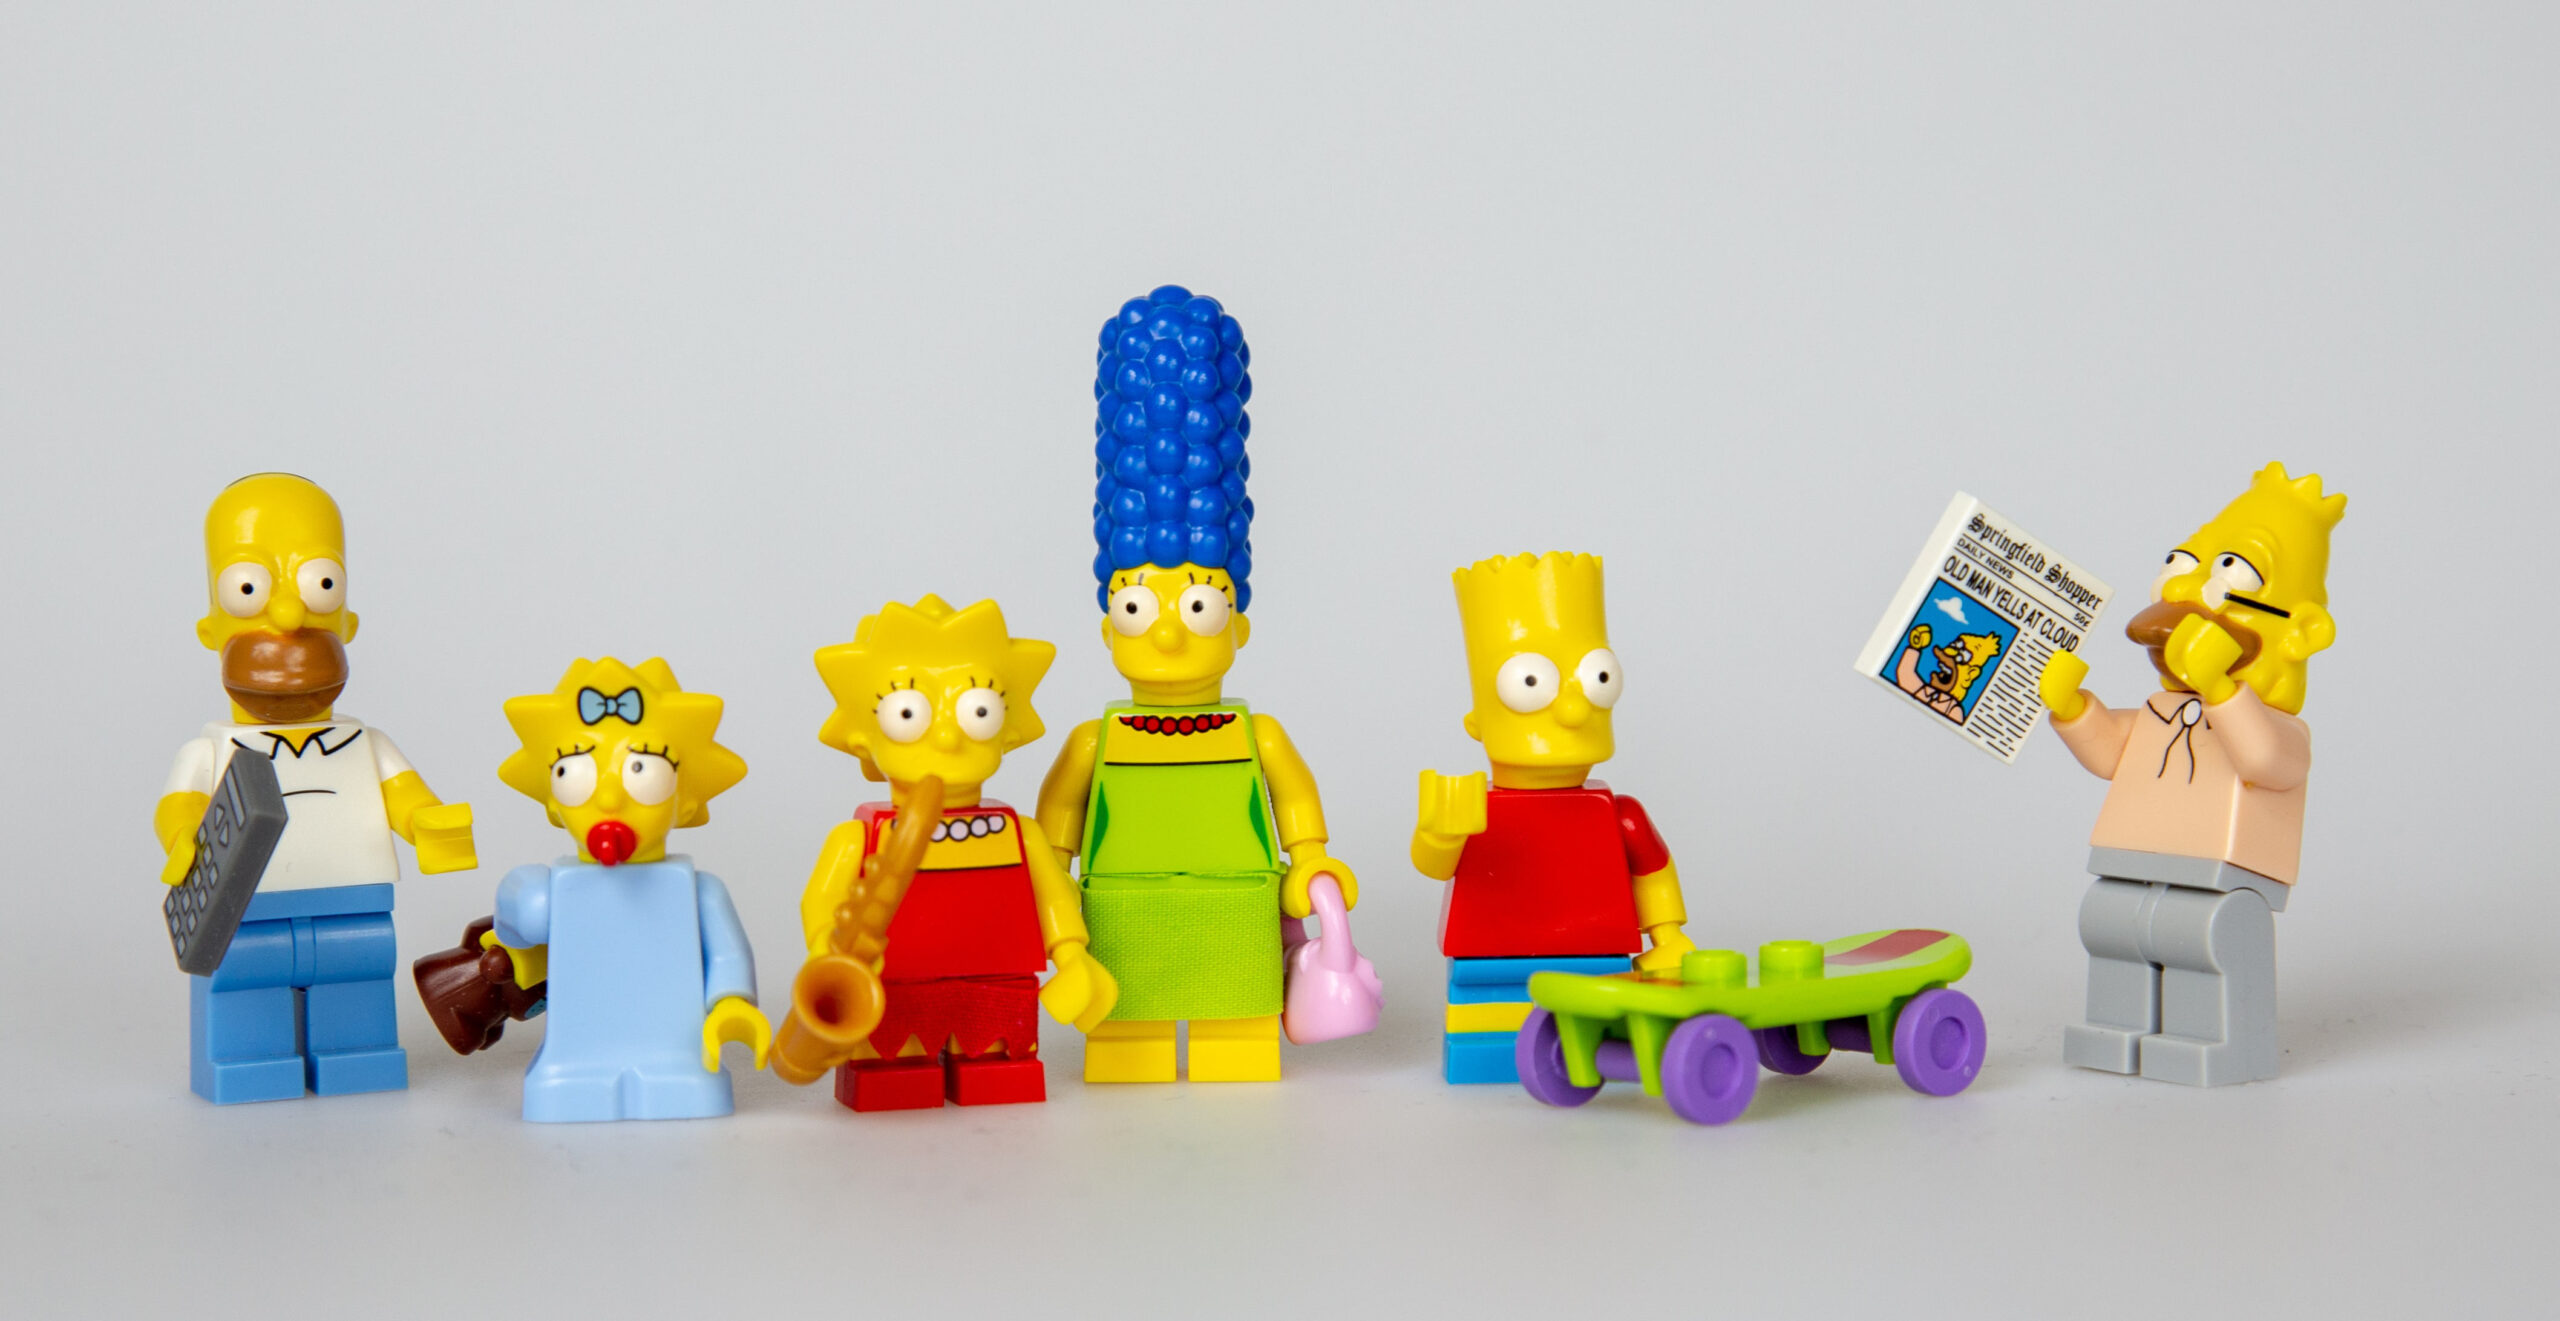 The Simpsons toys